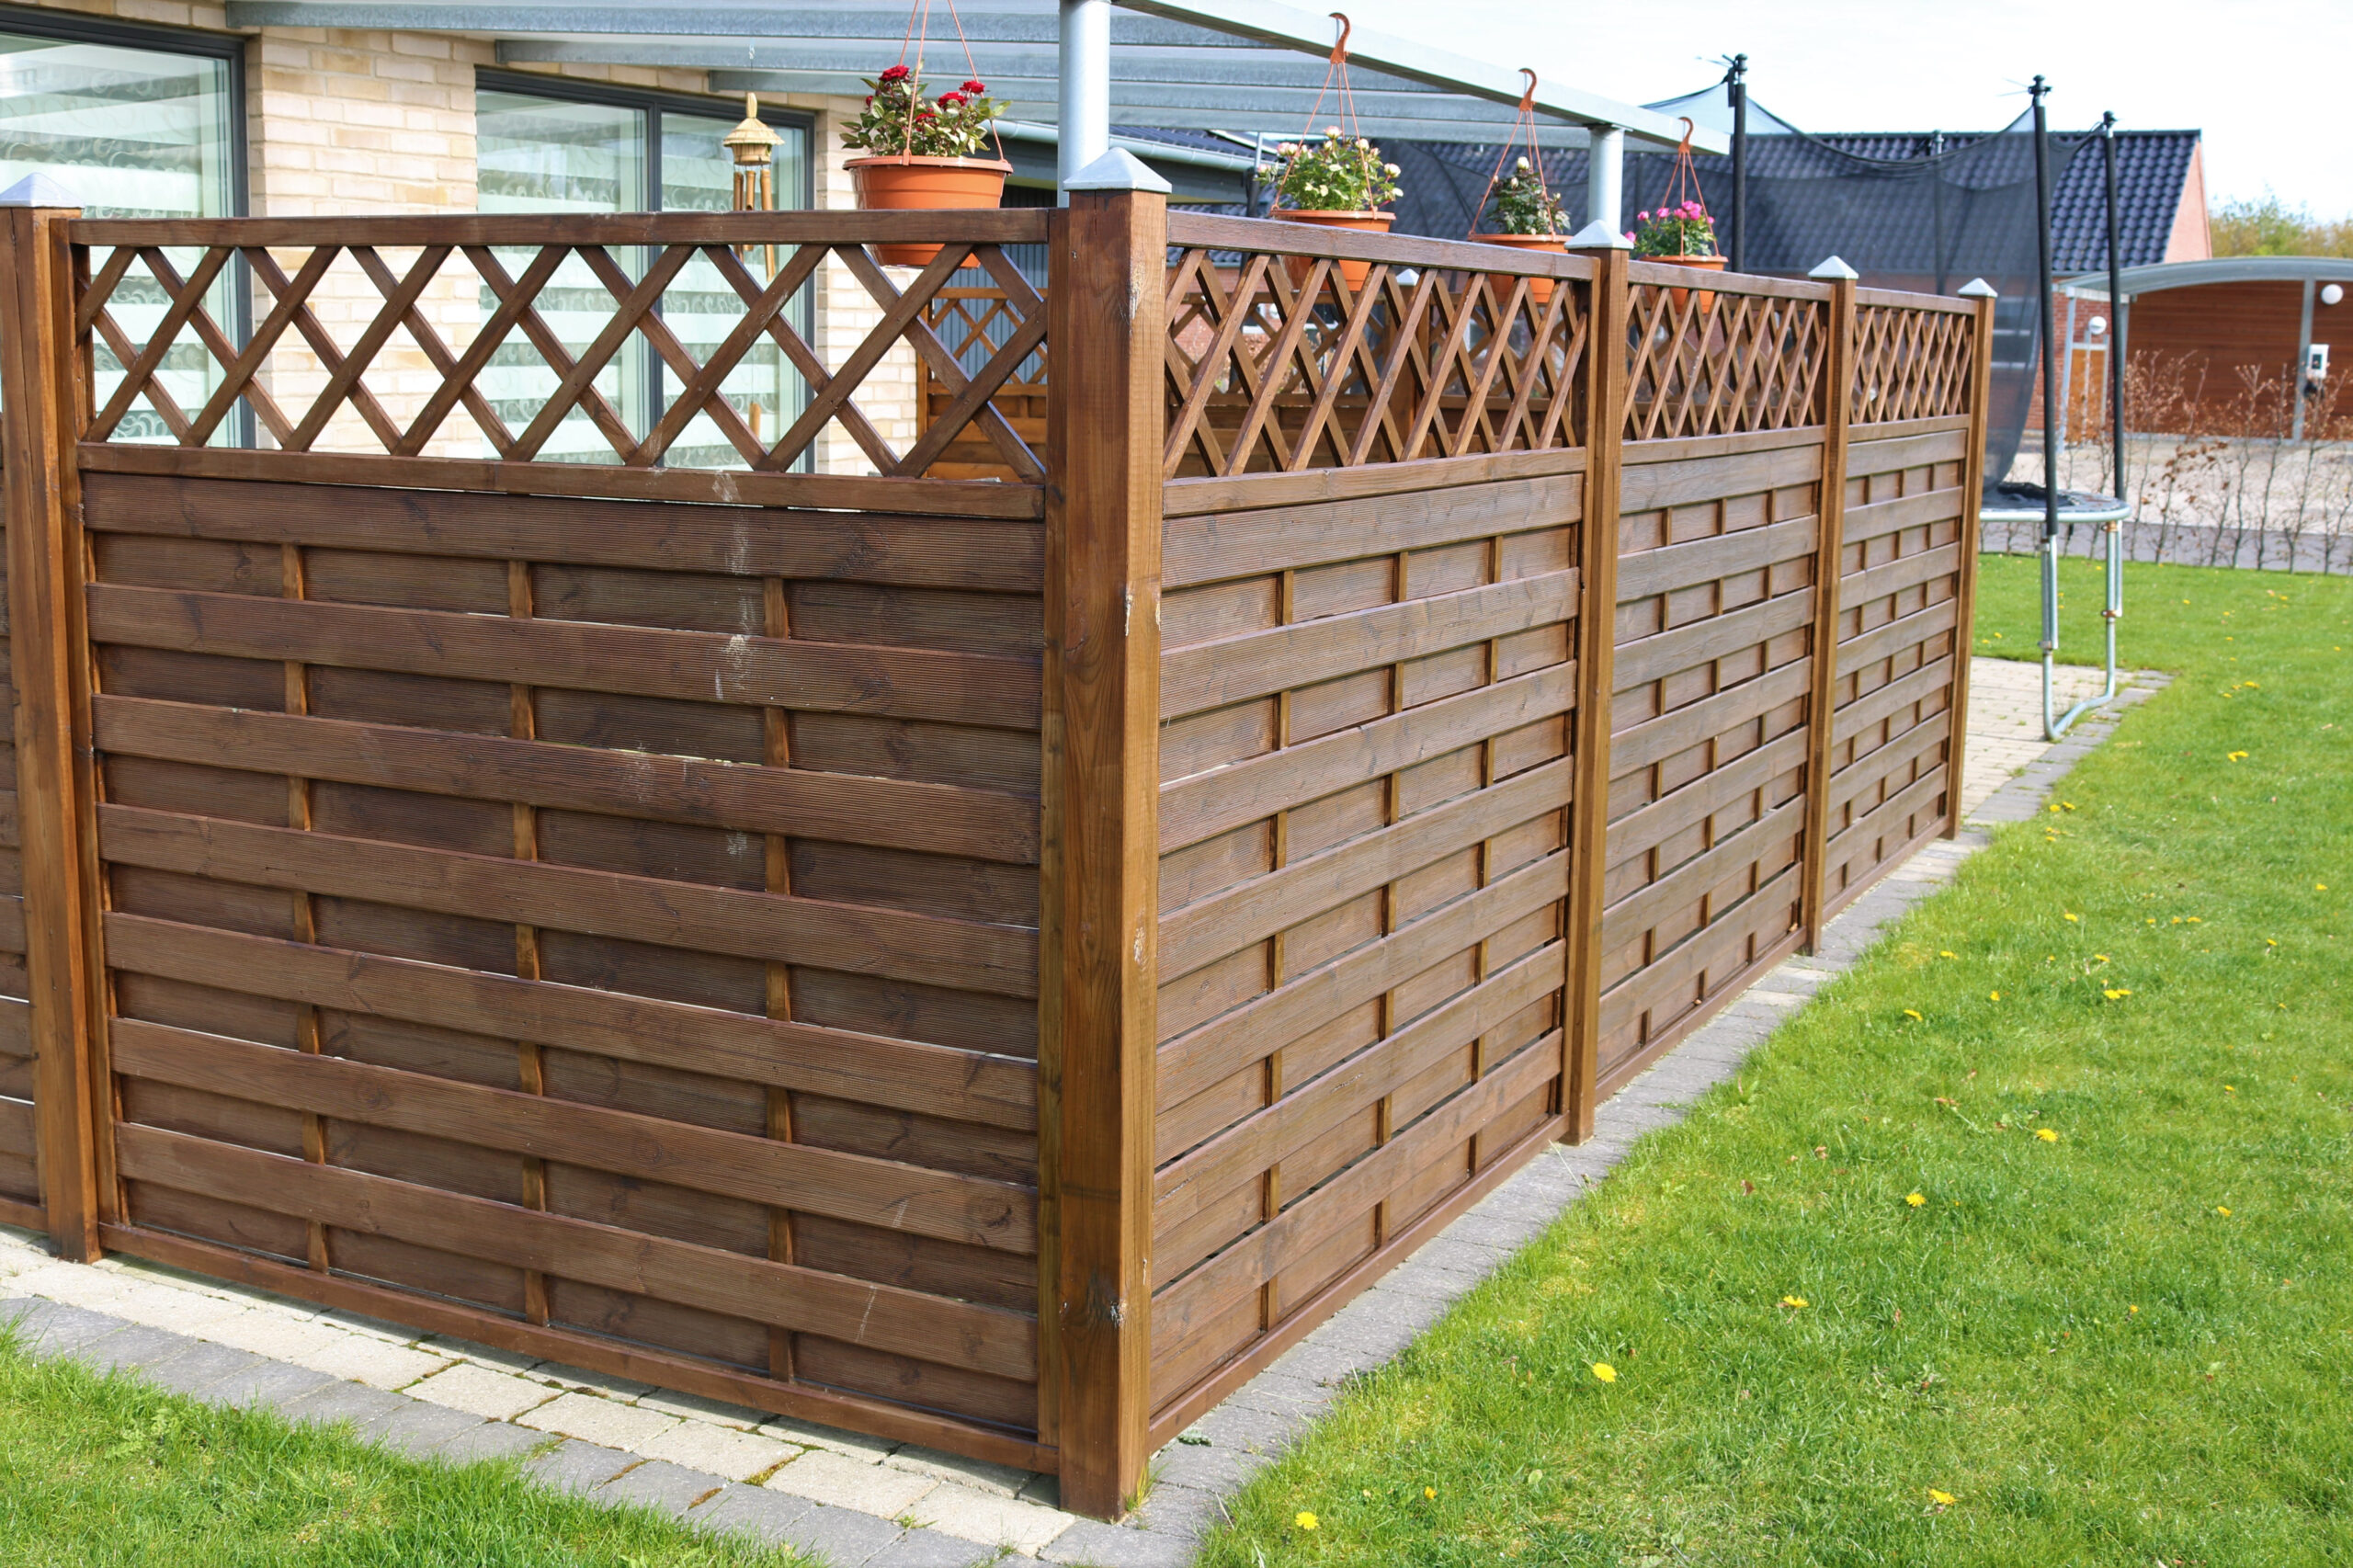 Terrace wooden fence with privacy lattice screen